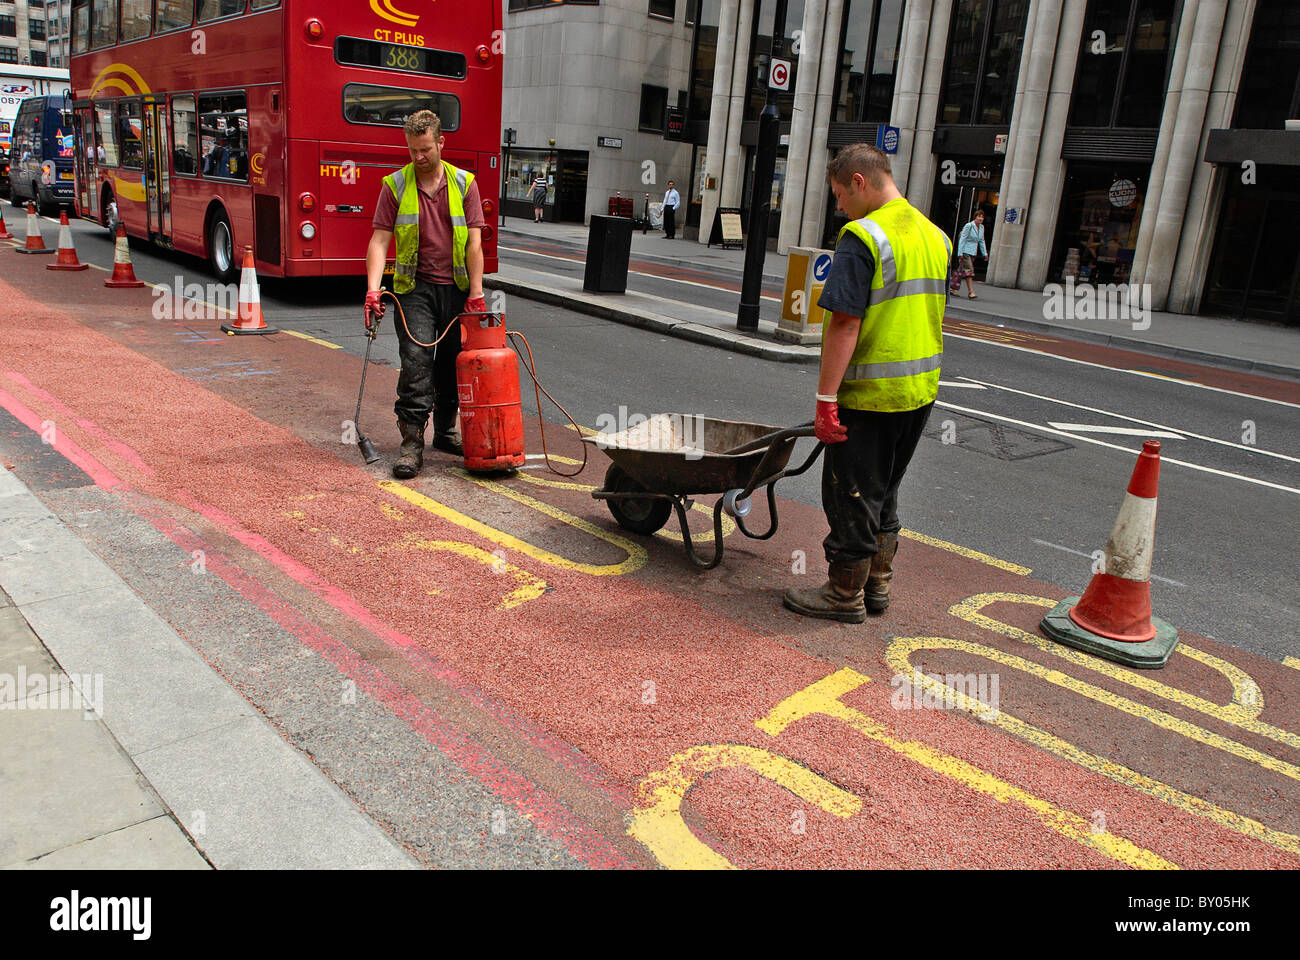 Construction road work at bus stop City of London England UK Stock Photo